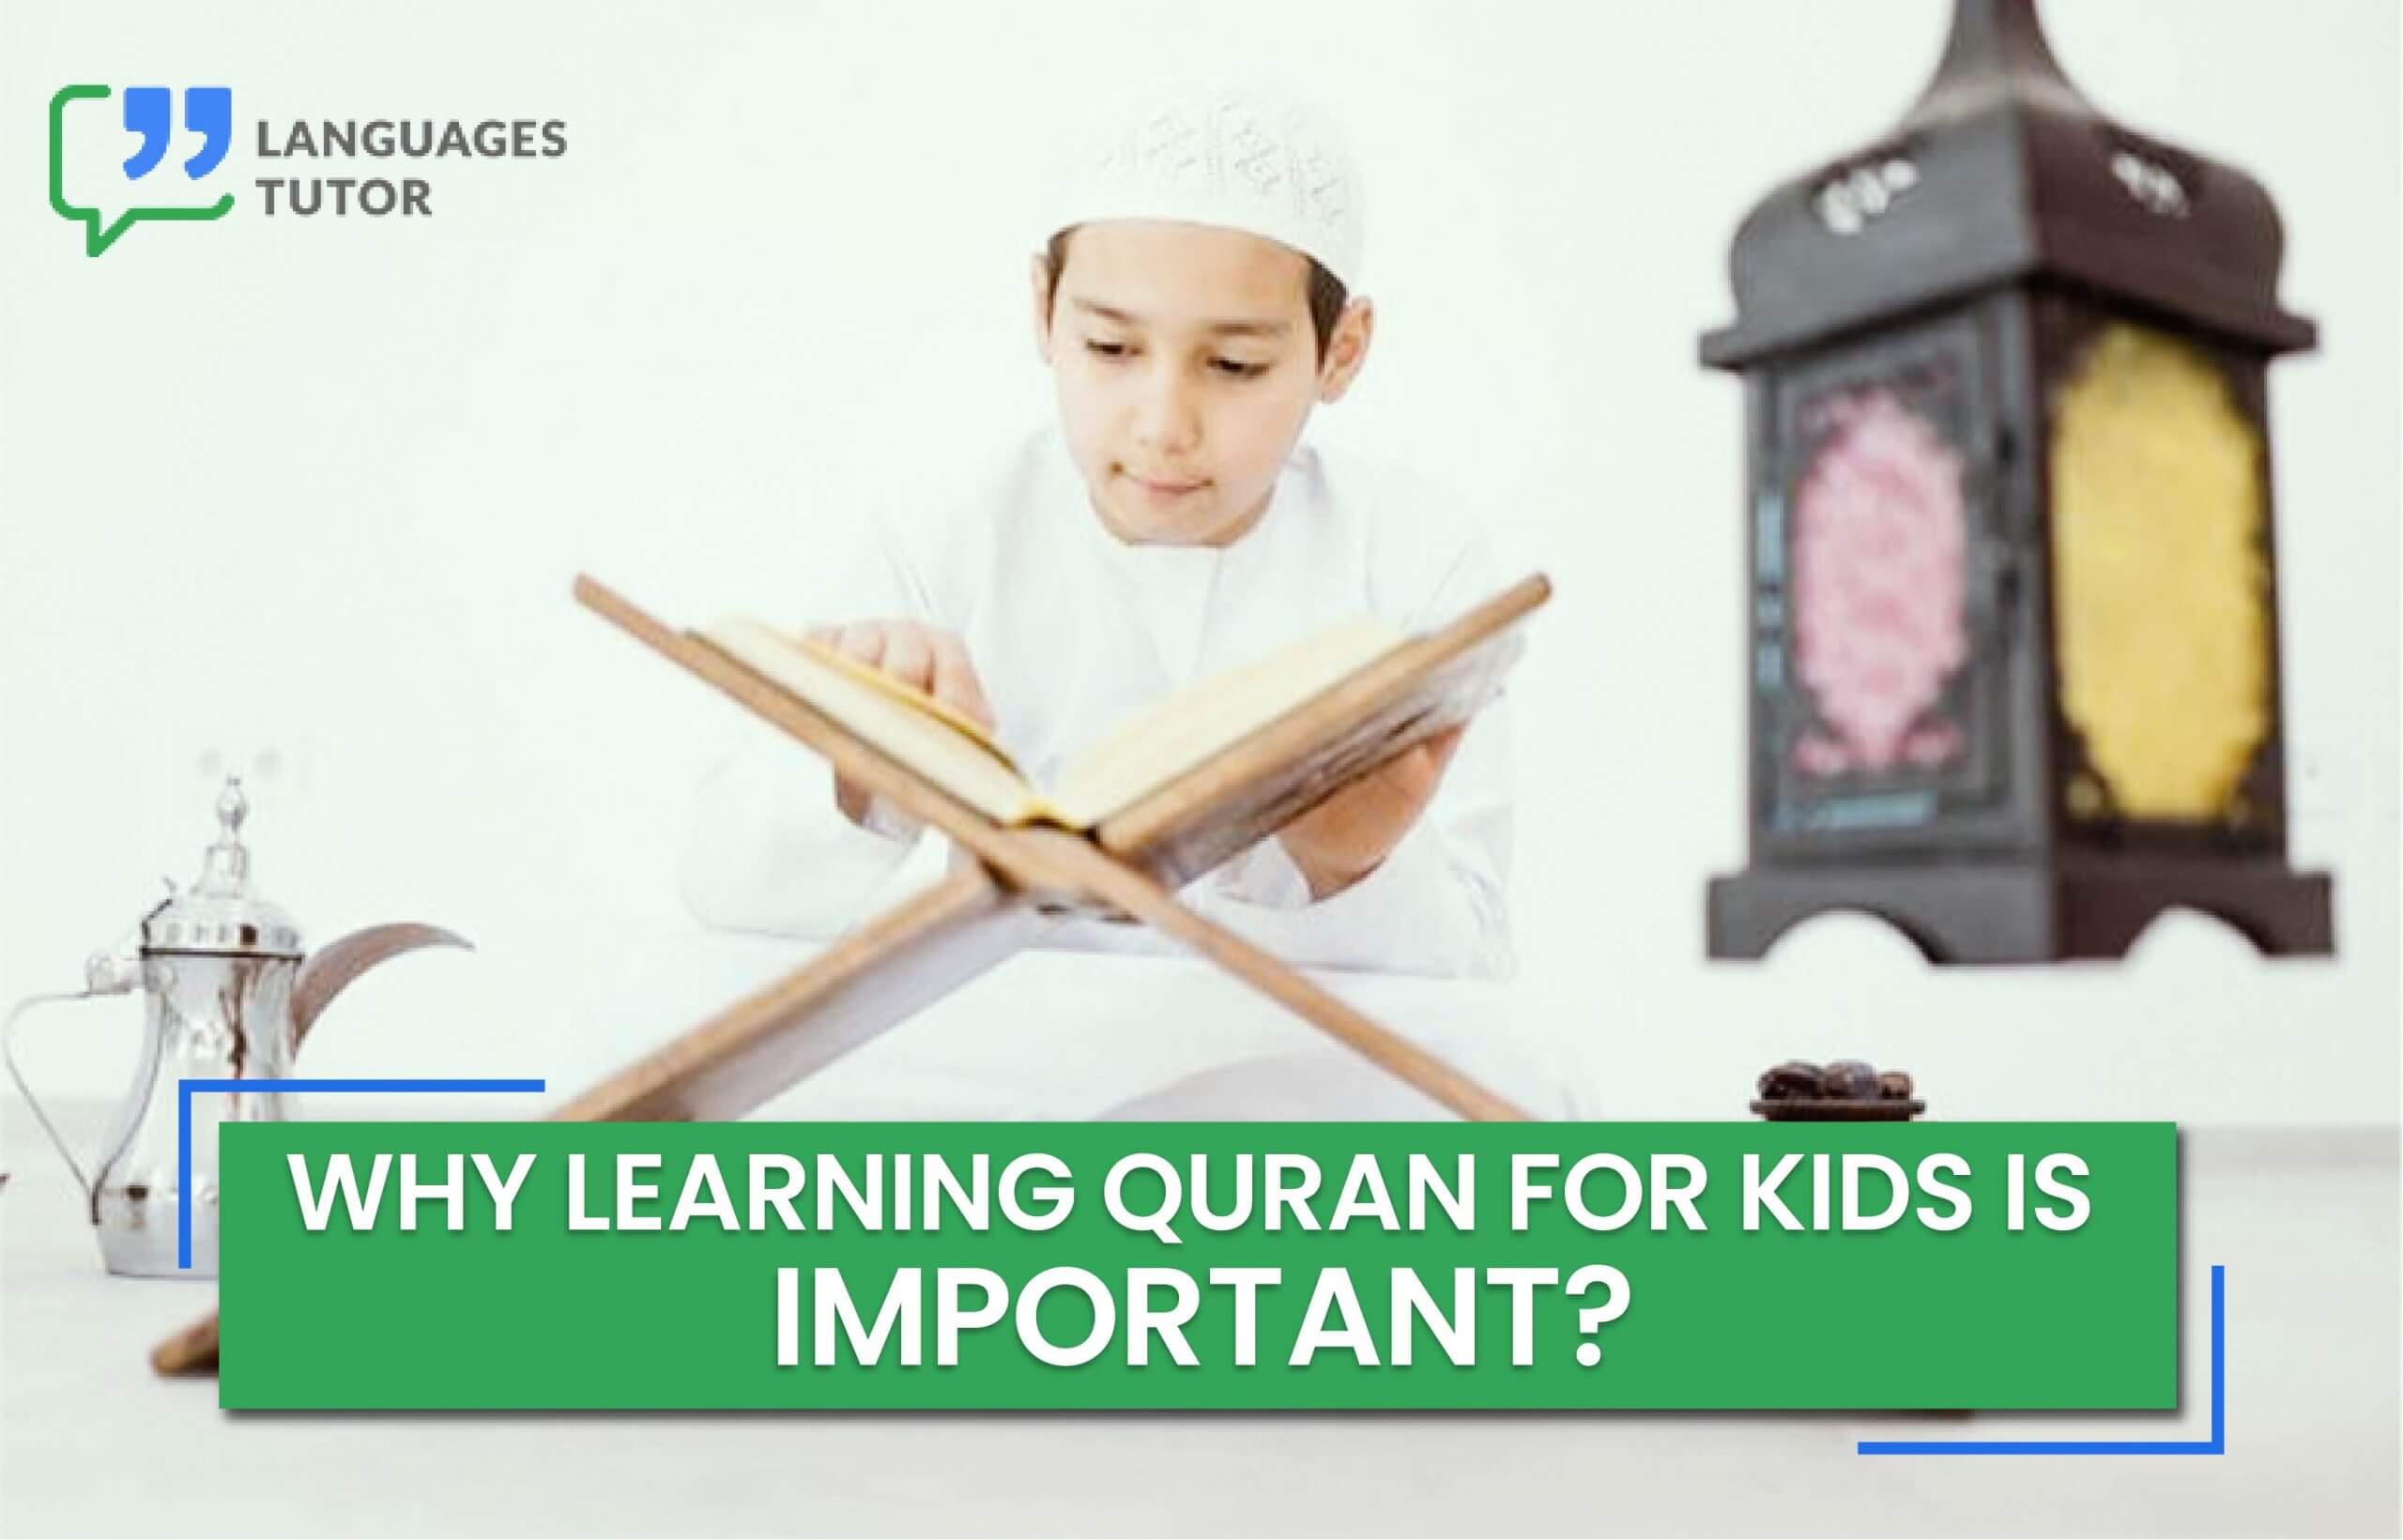 learning Quran is Important for kids